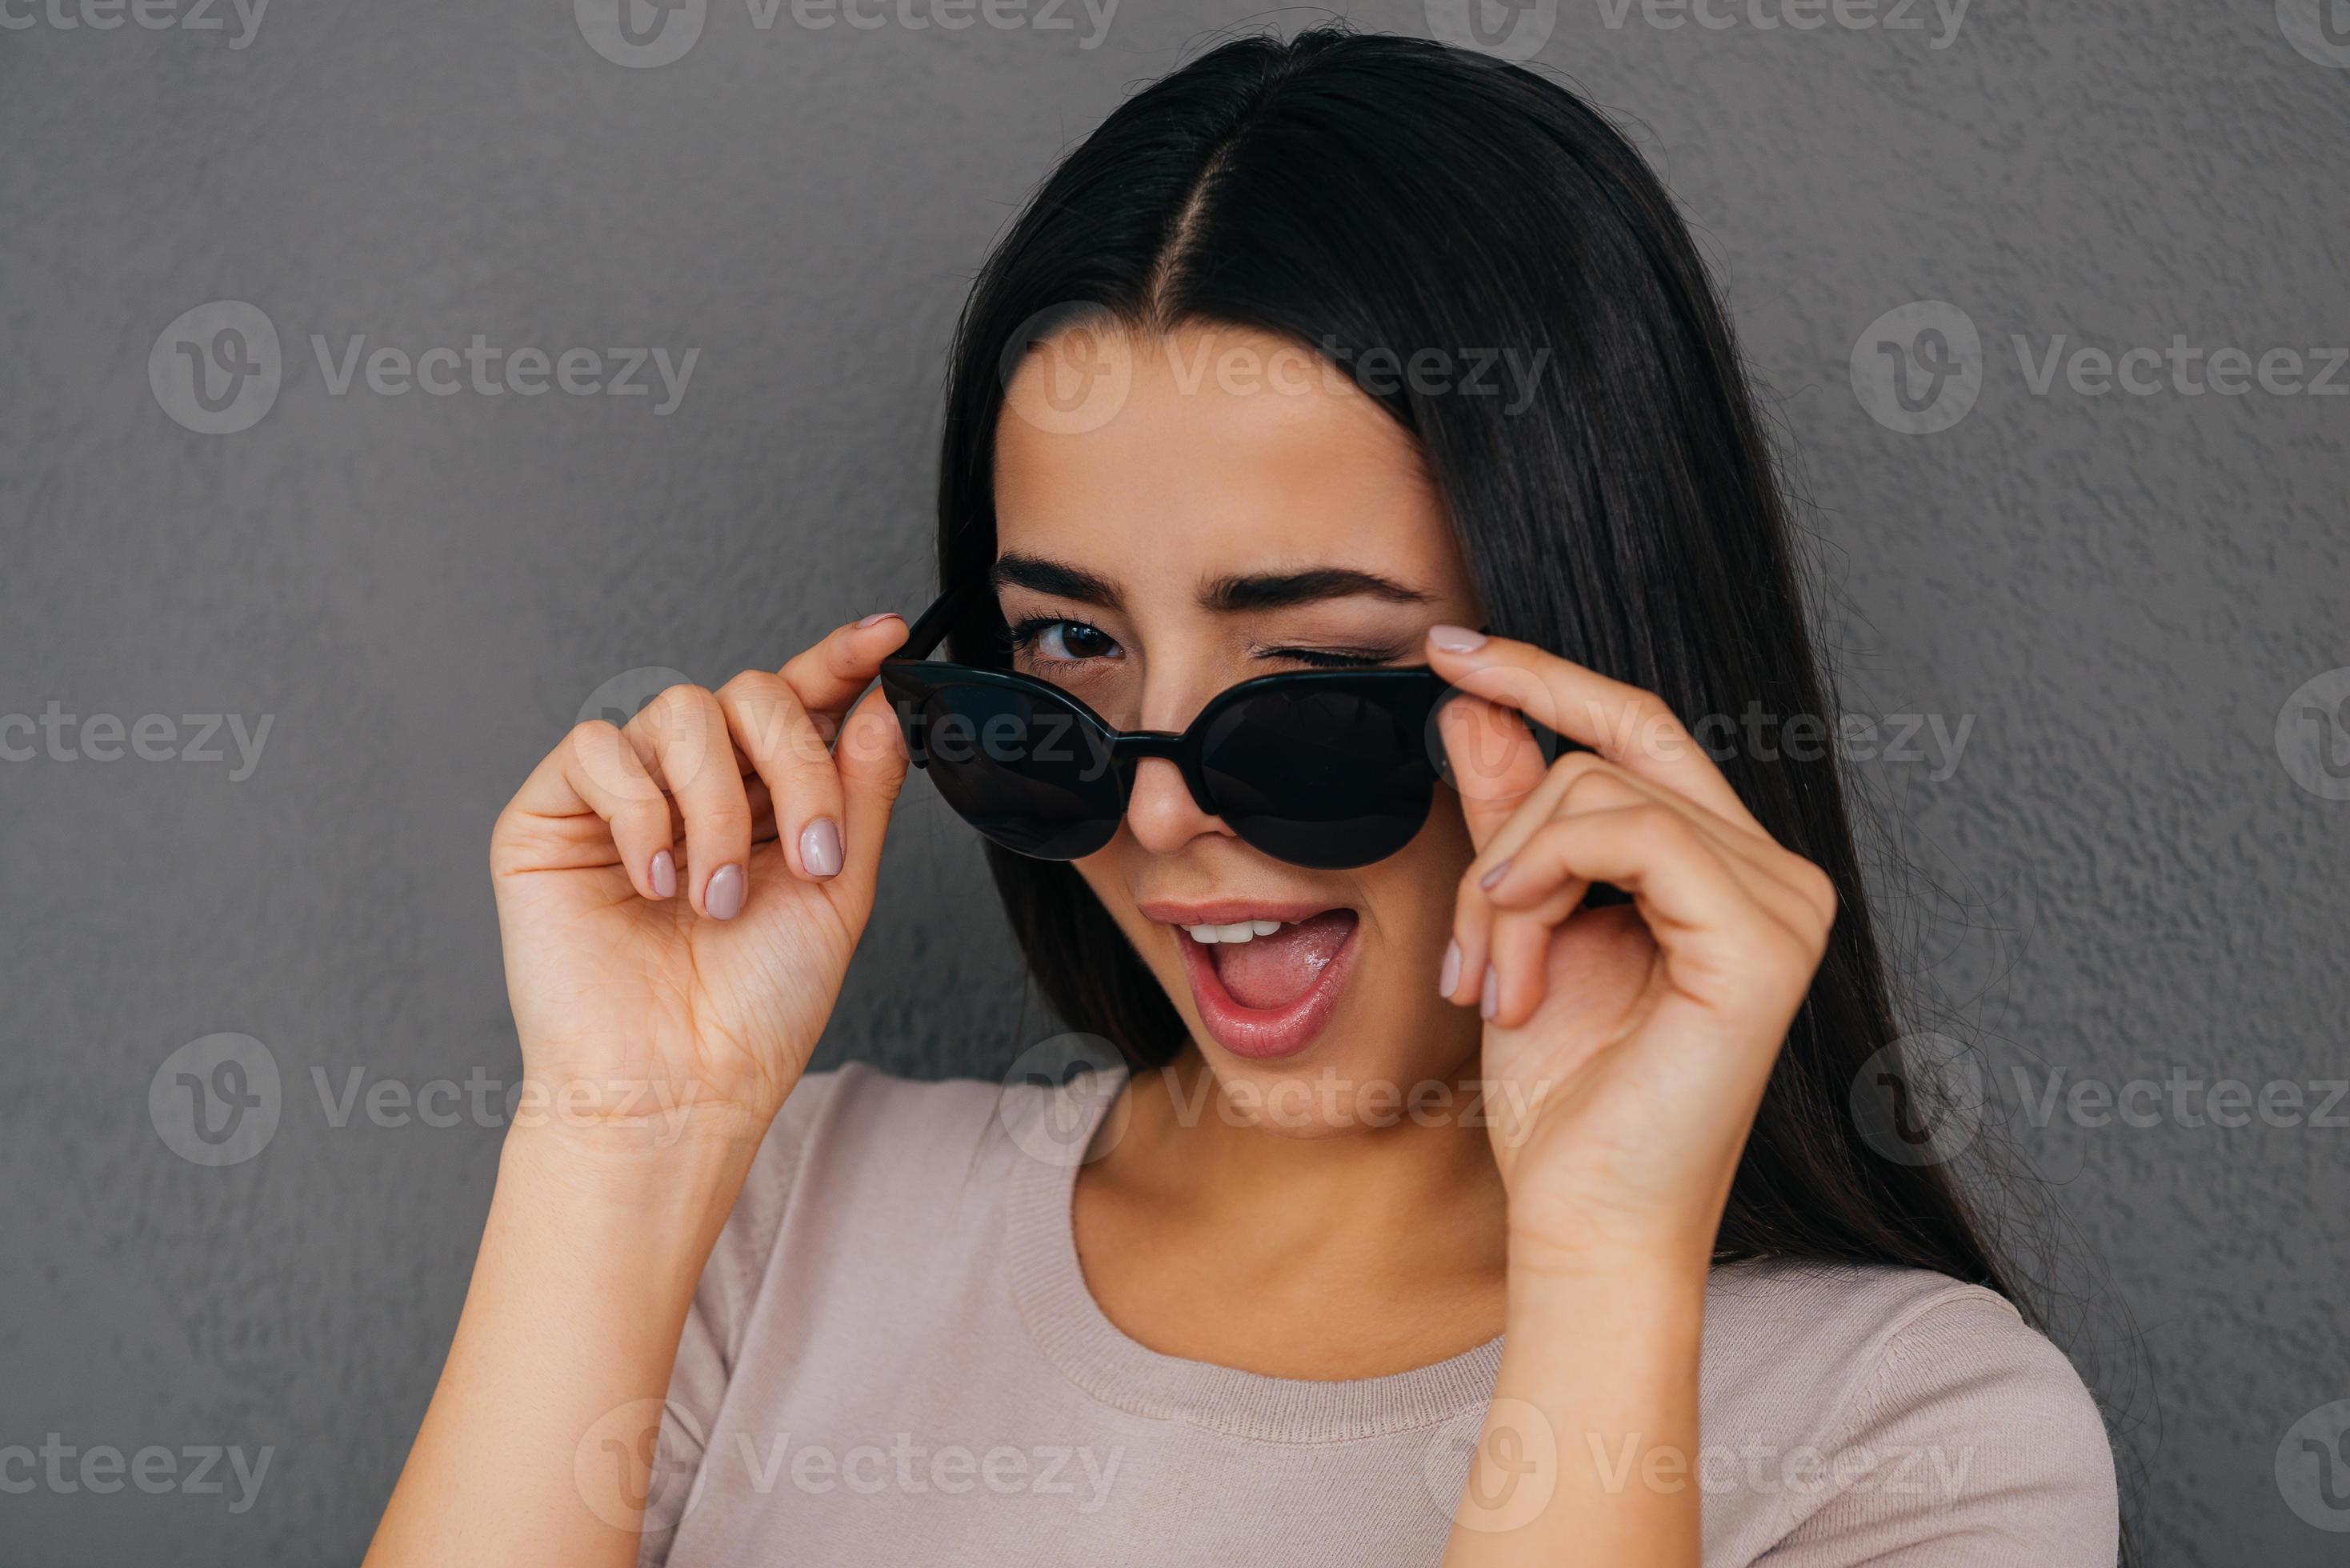 https://static.vecteezy.com/system/resources/previews/013/503/914/large_2x/feeling-flirty-playful-young-woman-adjusting-her-sunglasses-and-winking-to-you-while-standing-against-grey-background-photo.jpg